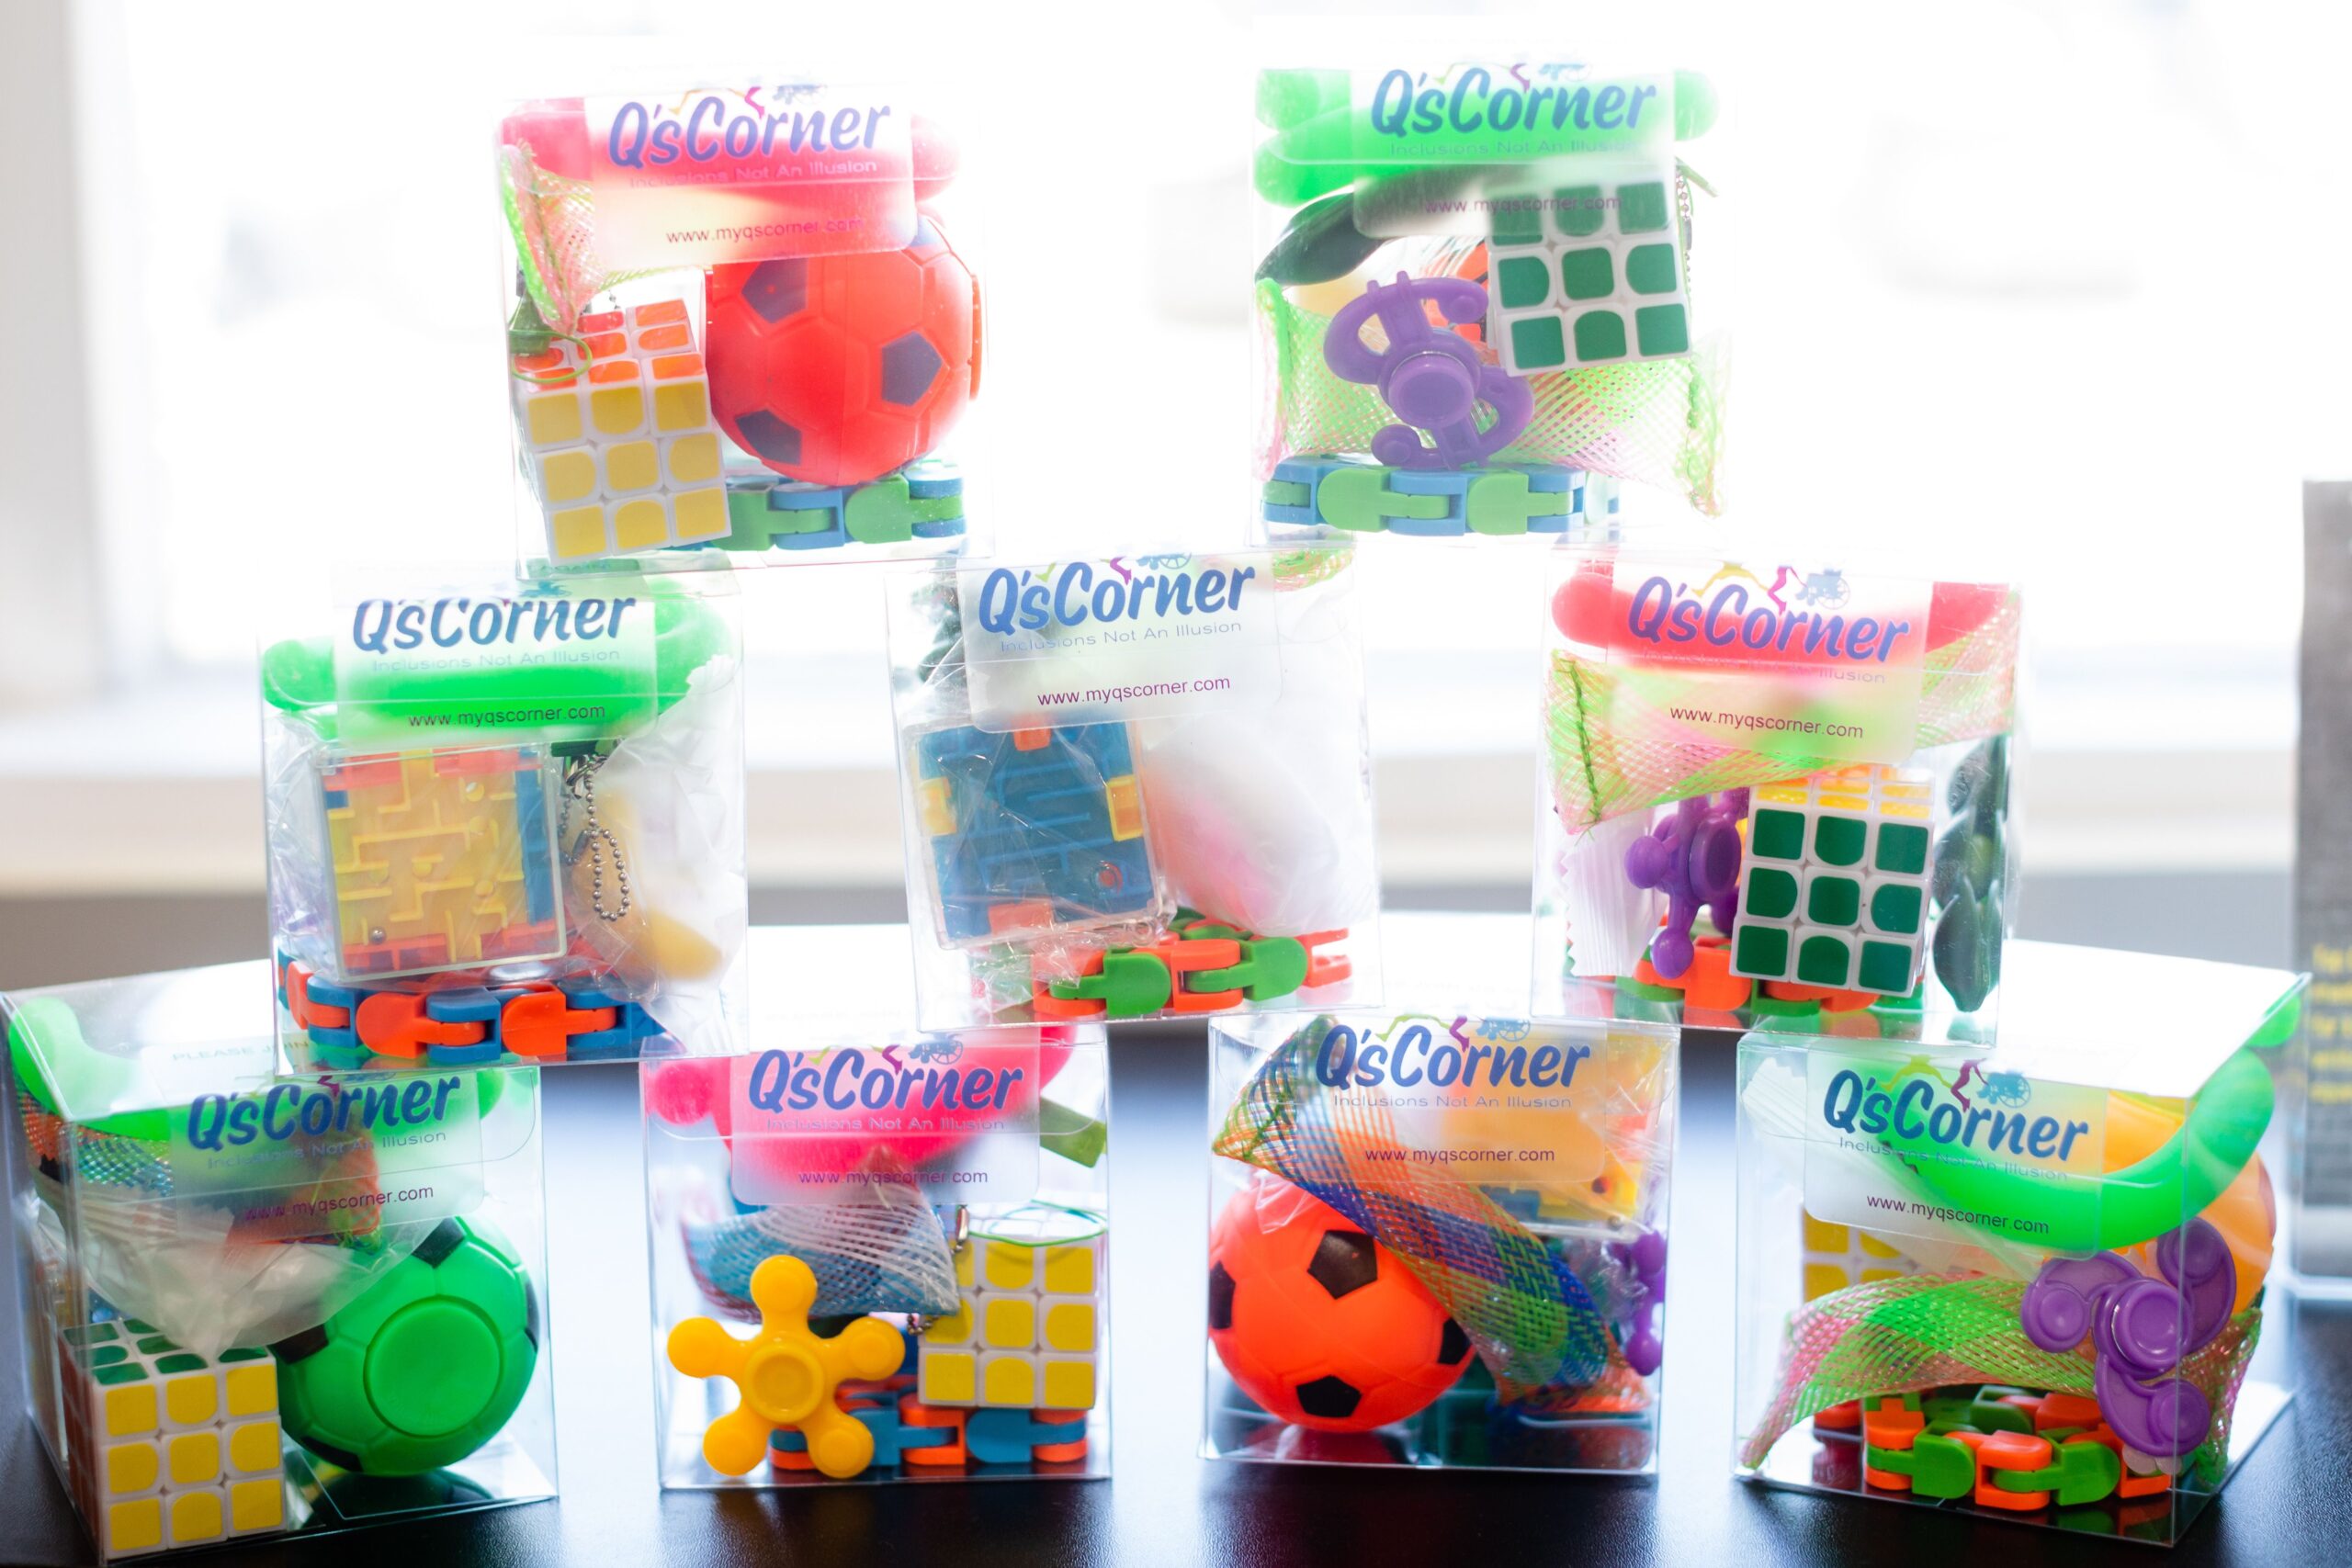 Little bags of games and activities sit on a counter at Q's Corner.